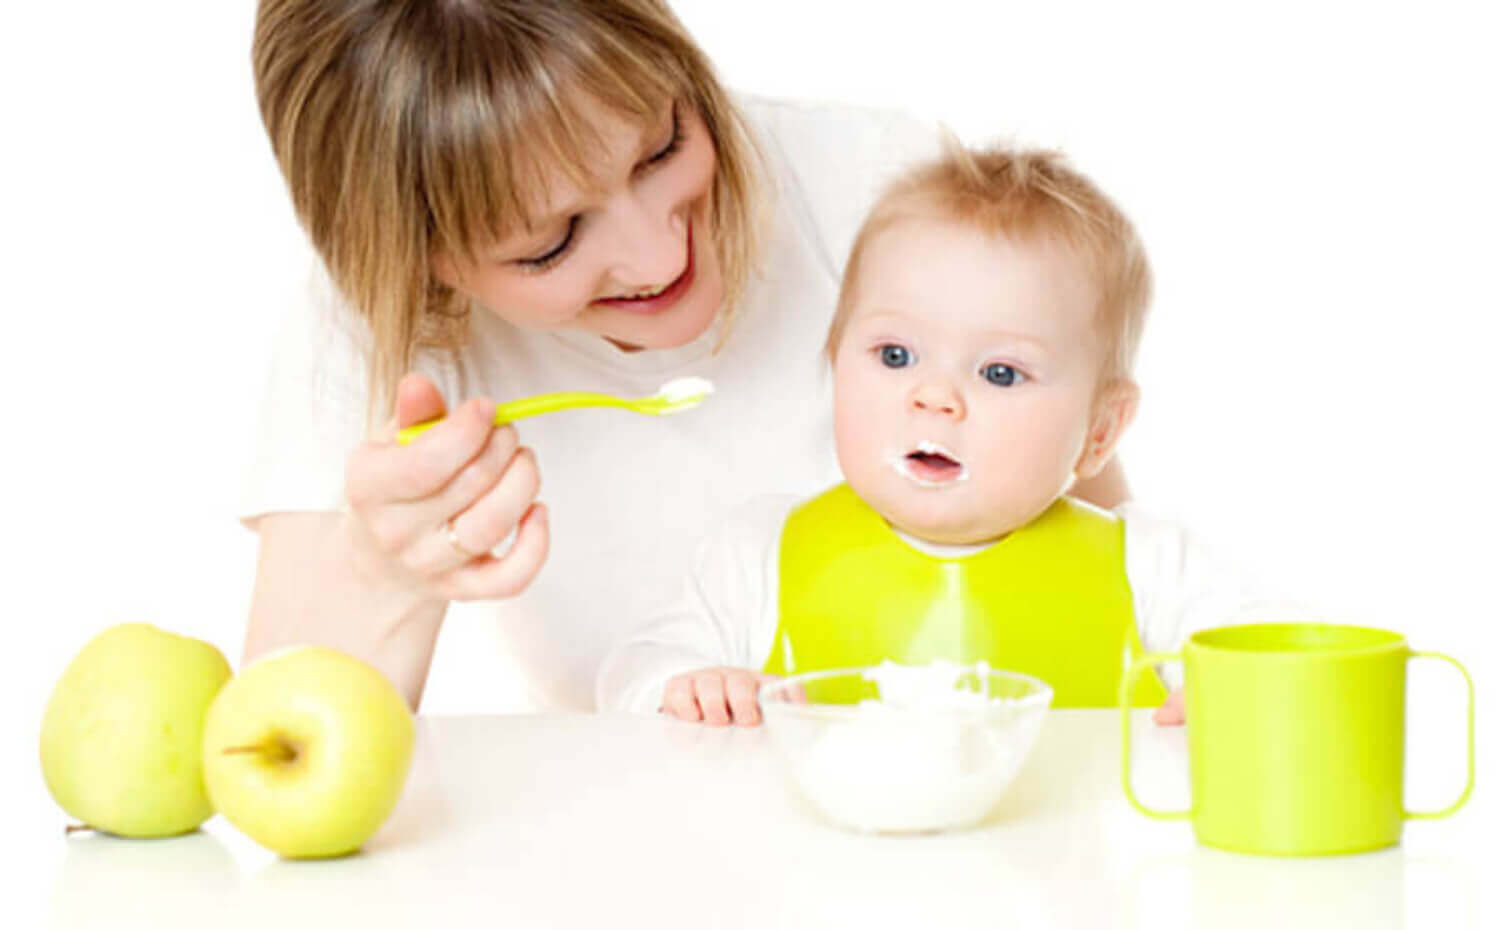 A mother feeding her baby apple sauce.